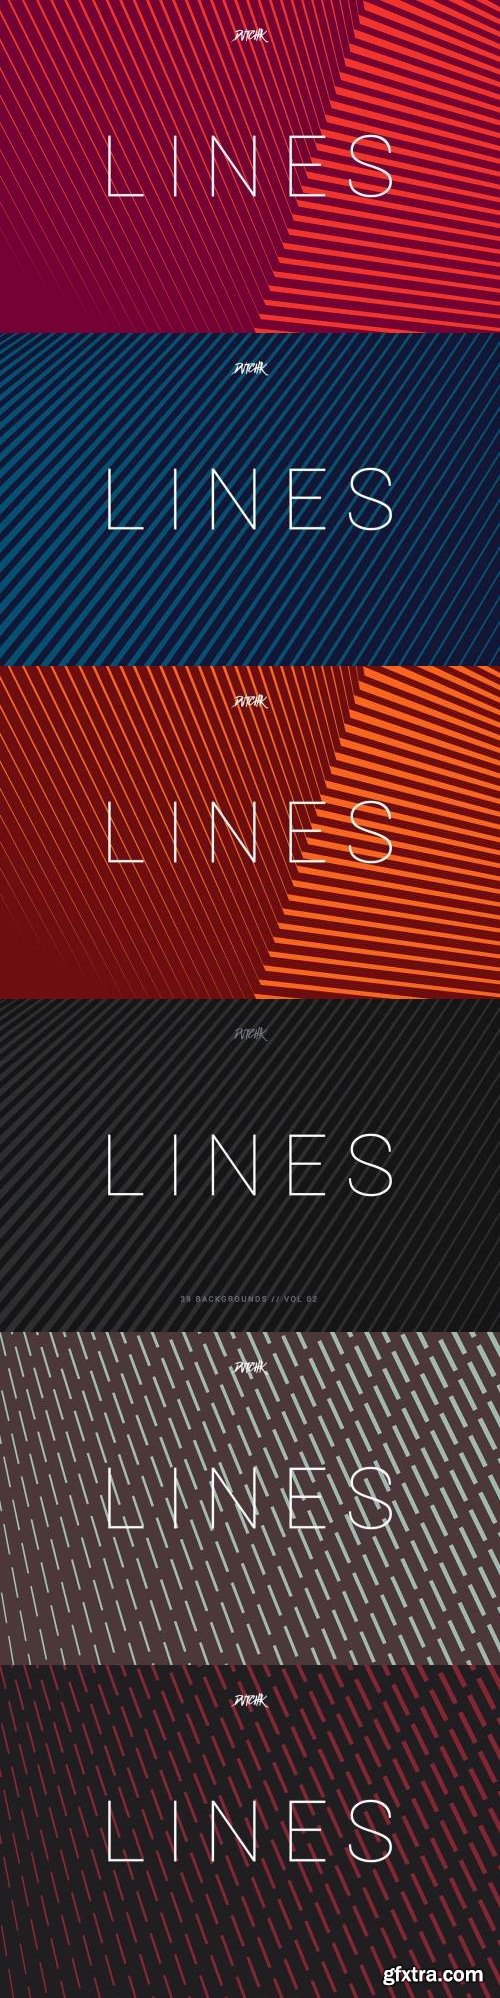 Lines | Abstract Stripes Backgrounds | Vol. 02